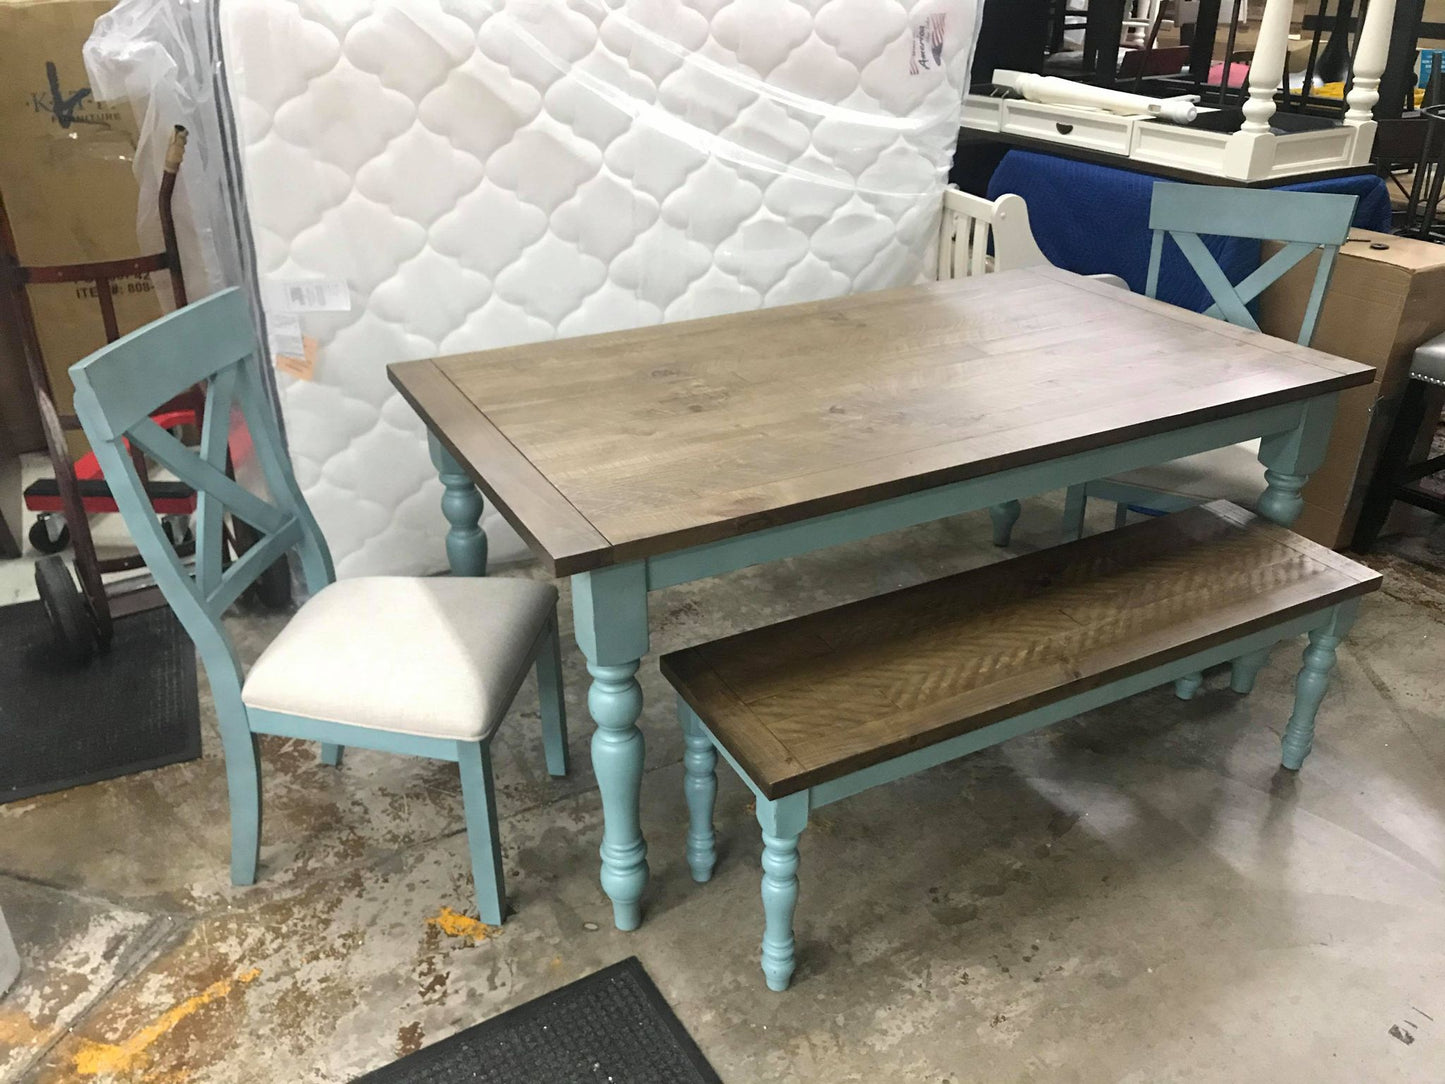 WEEKLY or MONTHLY. Kelsey Creek Dining Table & 4 Chairs & Bench